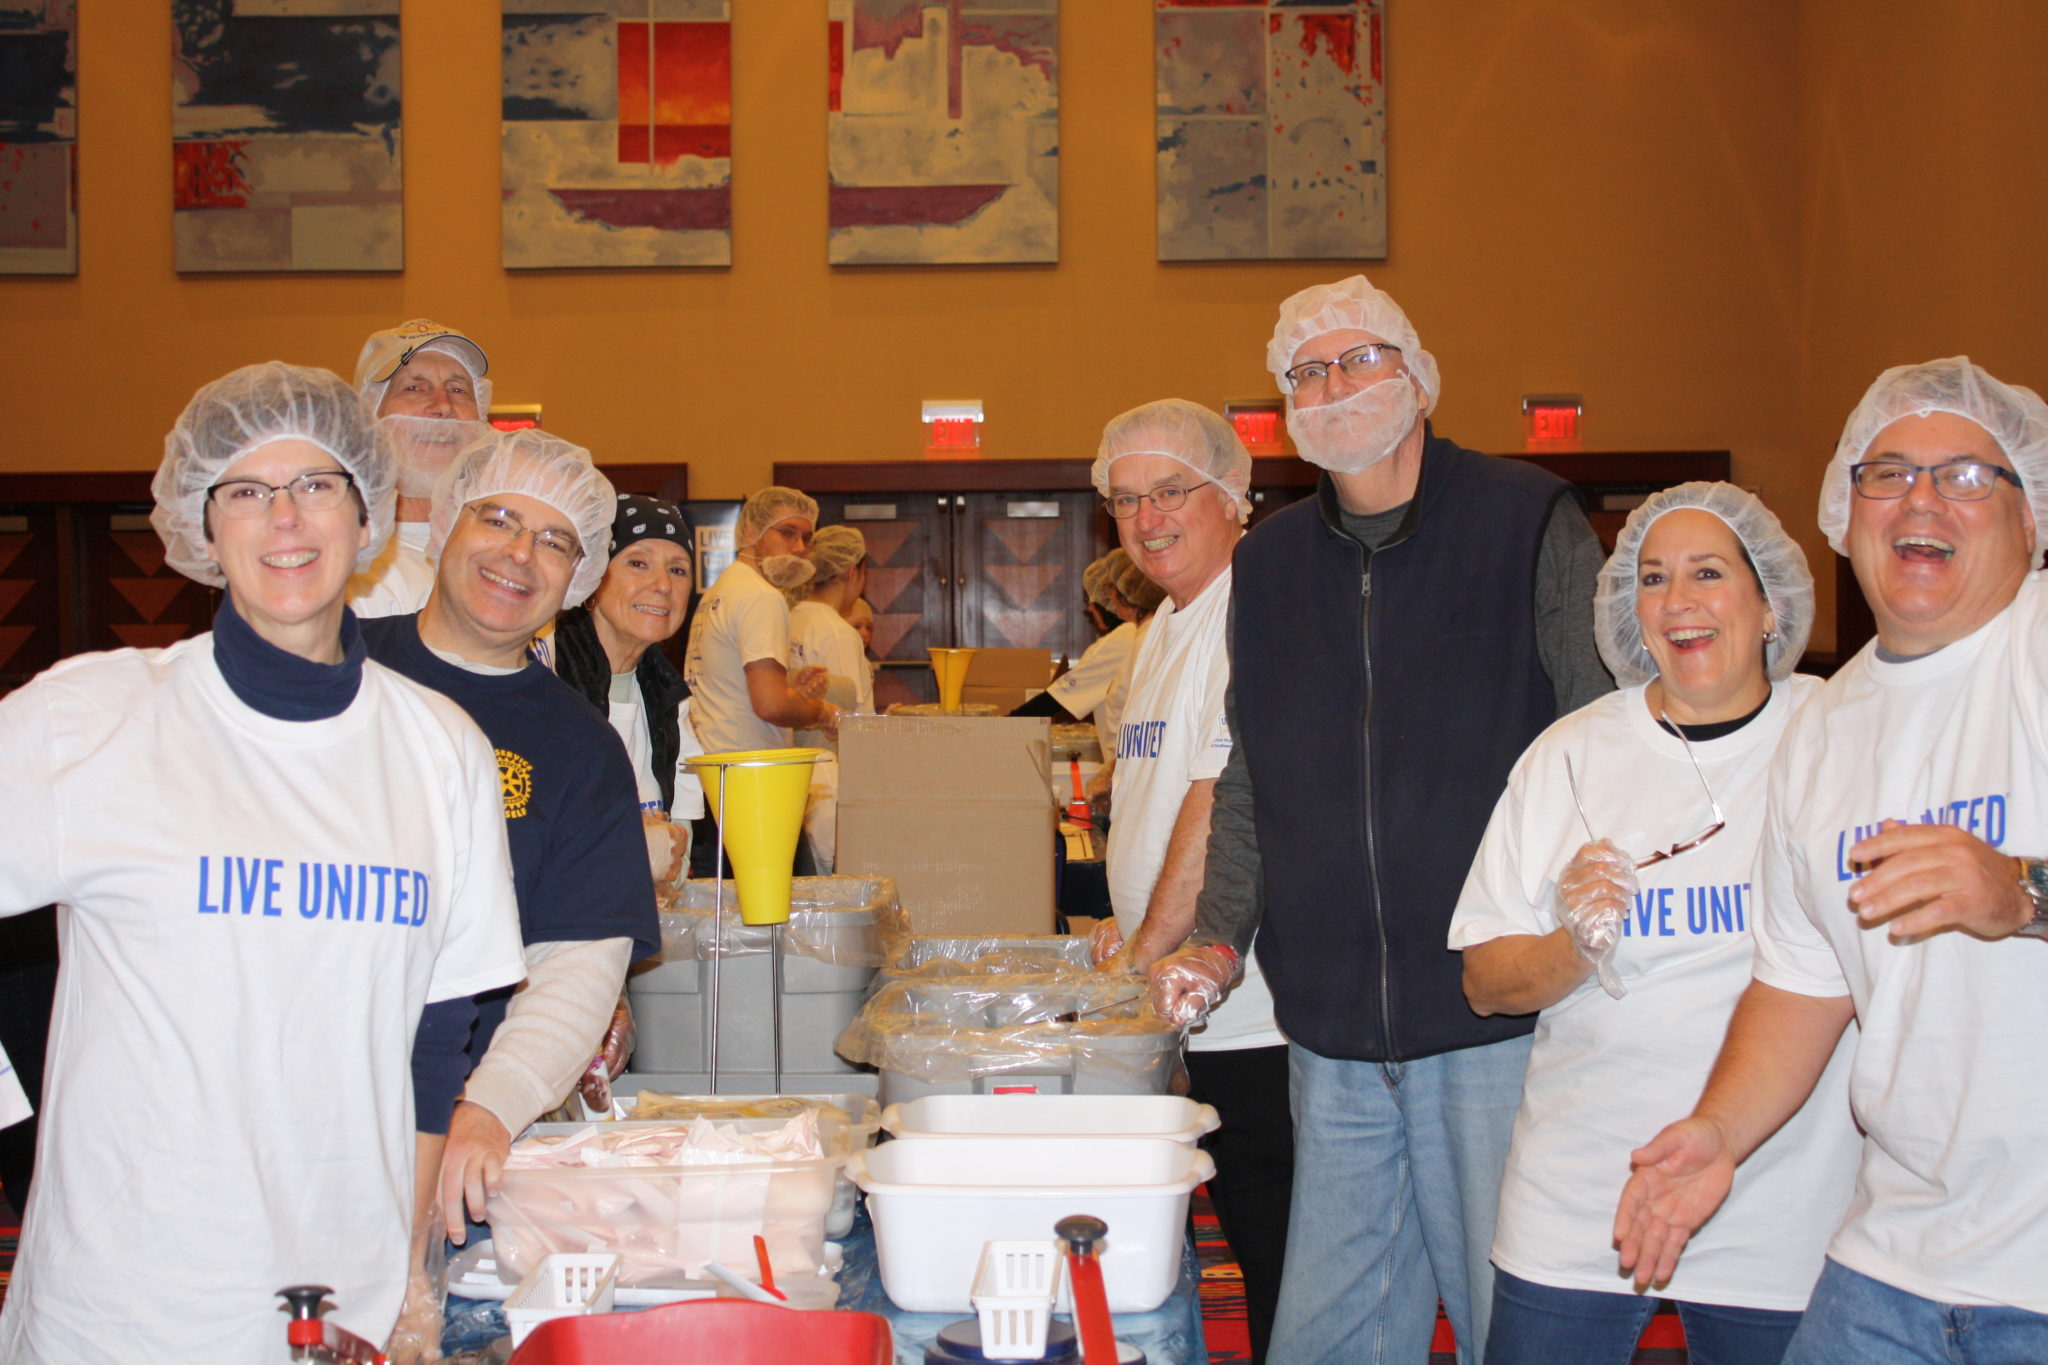 rotarians at meal packing event